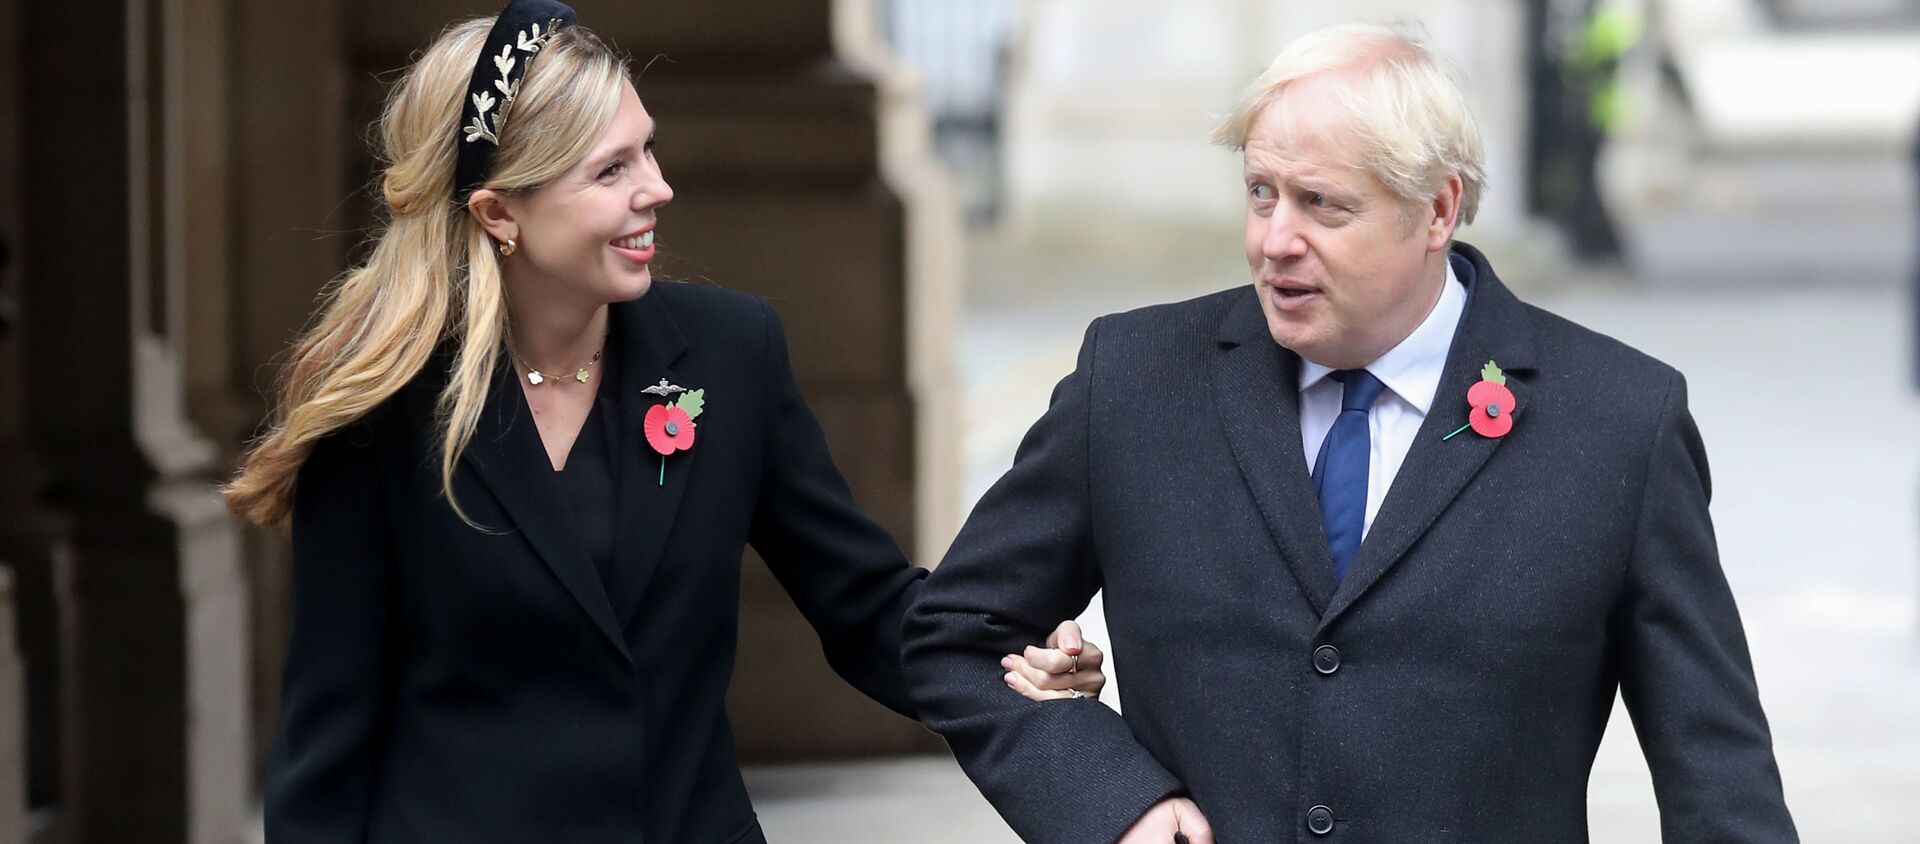 Britain's Prime Minister Boris Johnson (R) and his parter Carrie Symonds (L) meet veterans at the Remembrance Sunday ceremony at the Cenotaph on Whitehall in central London, on November 8, 2020 - Sputnik International, 1920, 15.11.2020